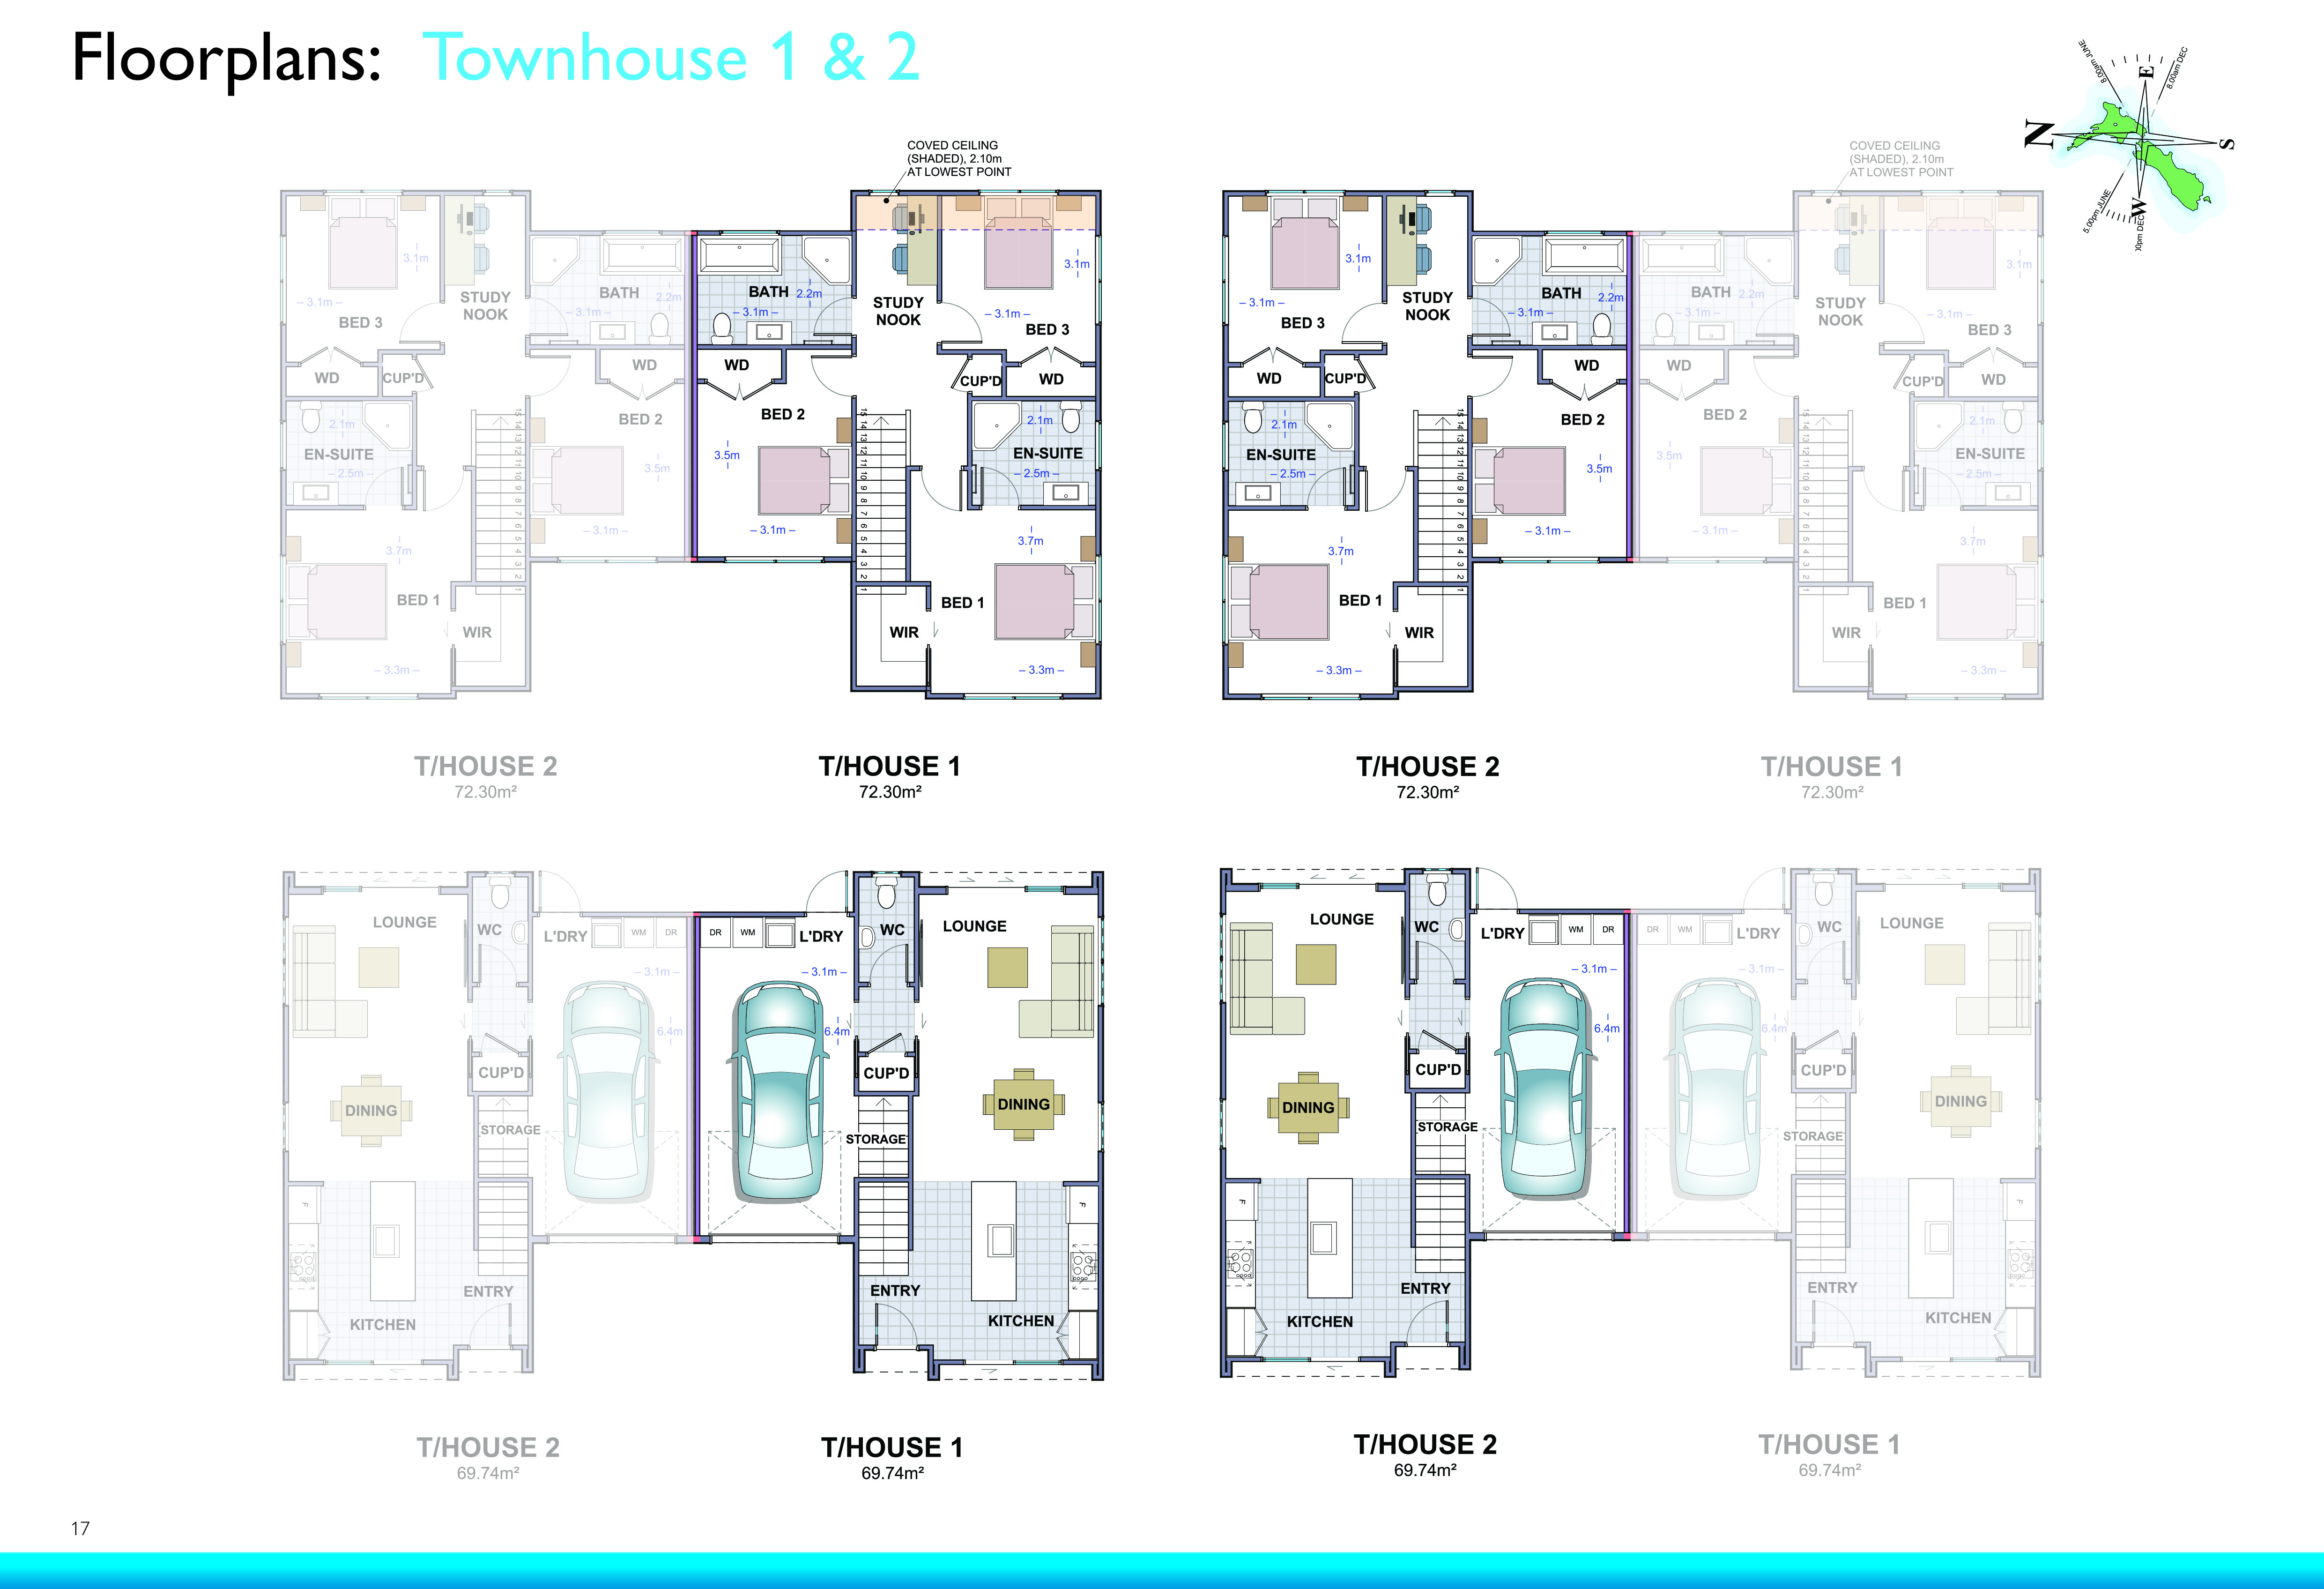 Townhouse 1 and 2 floor plan